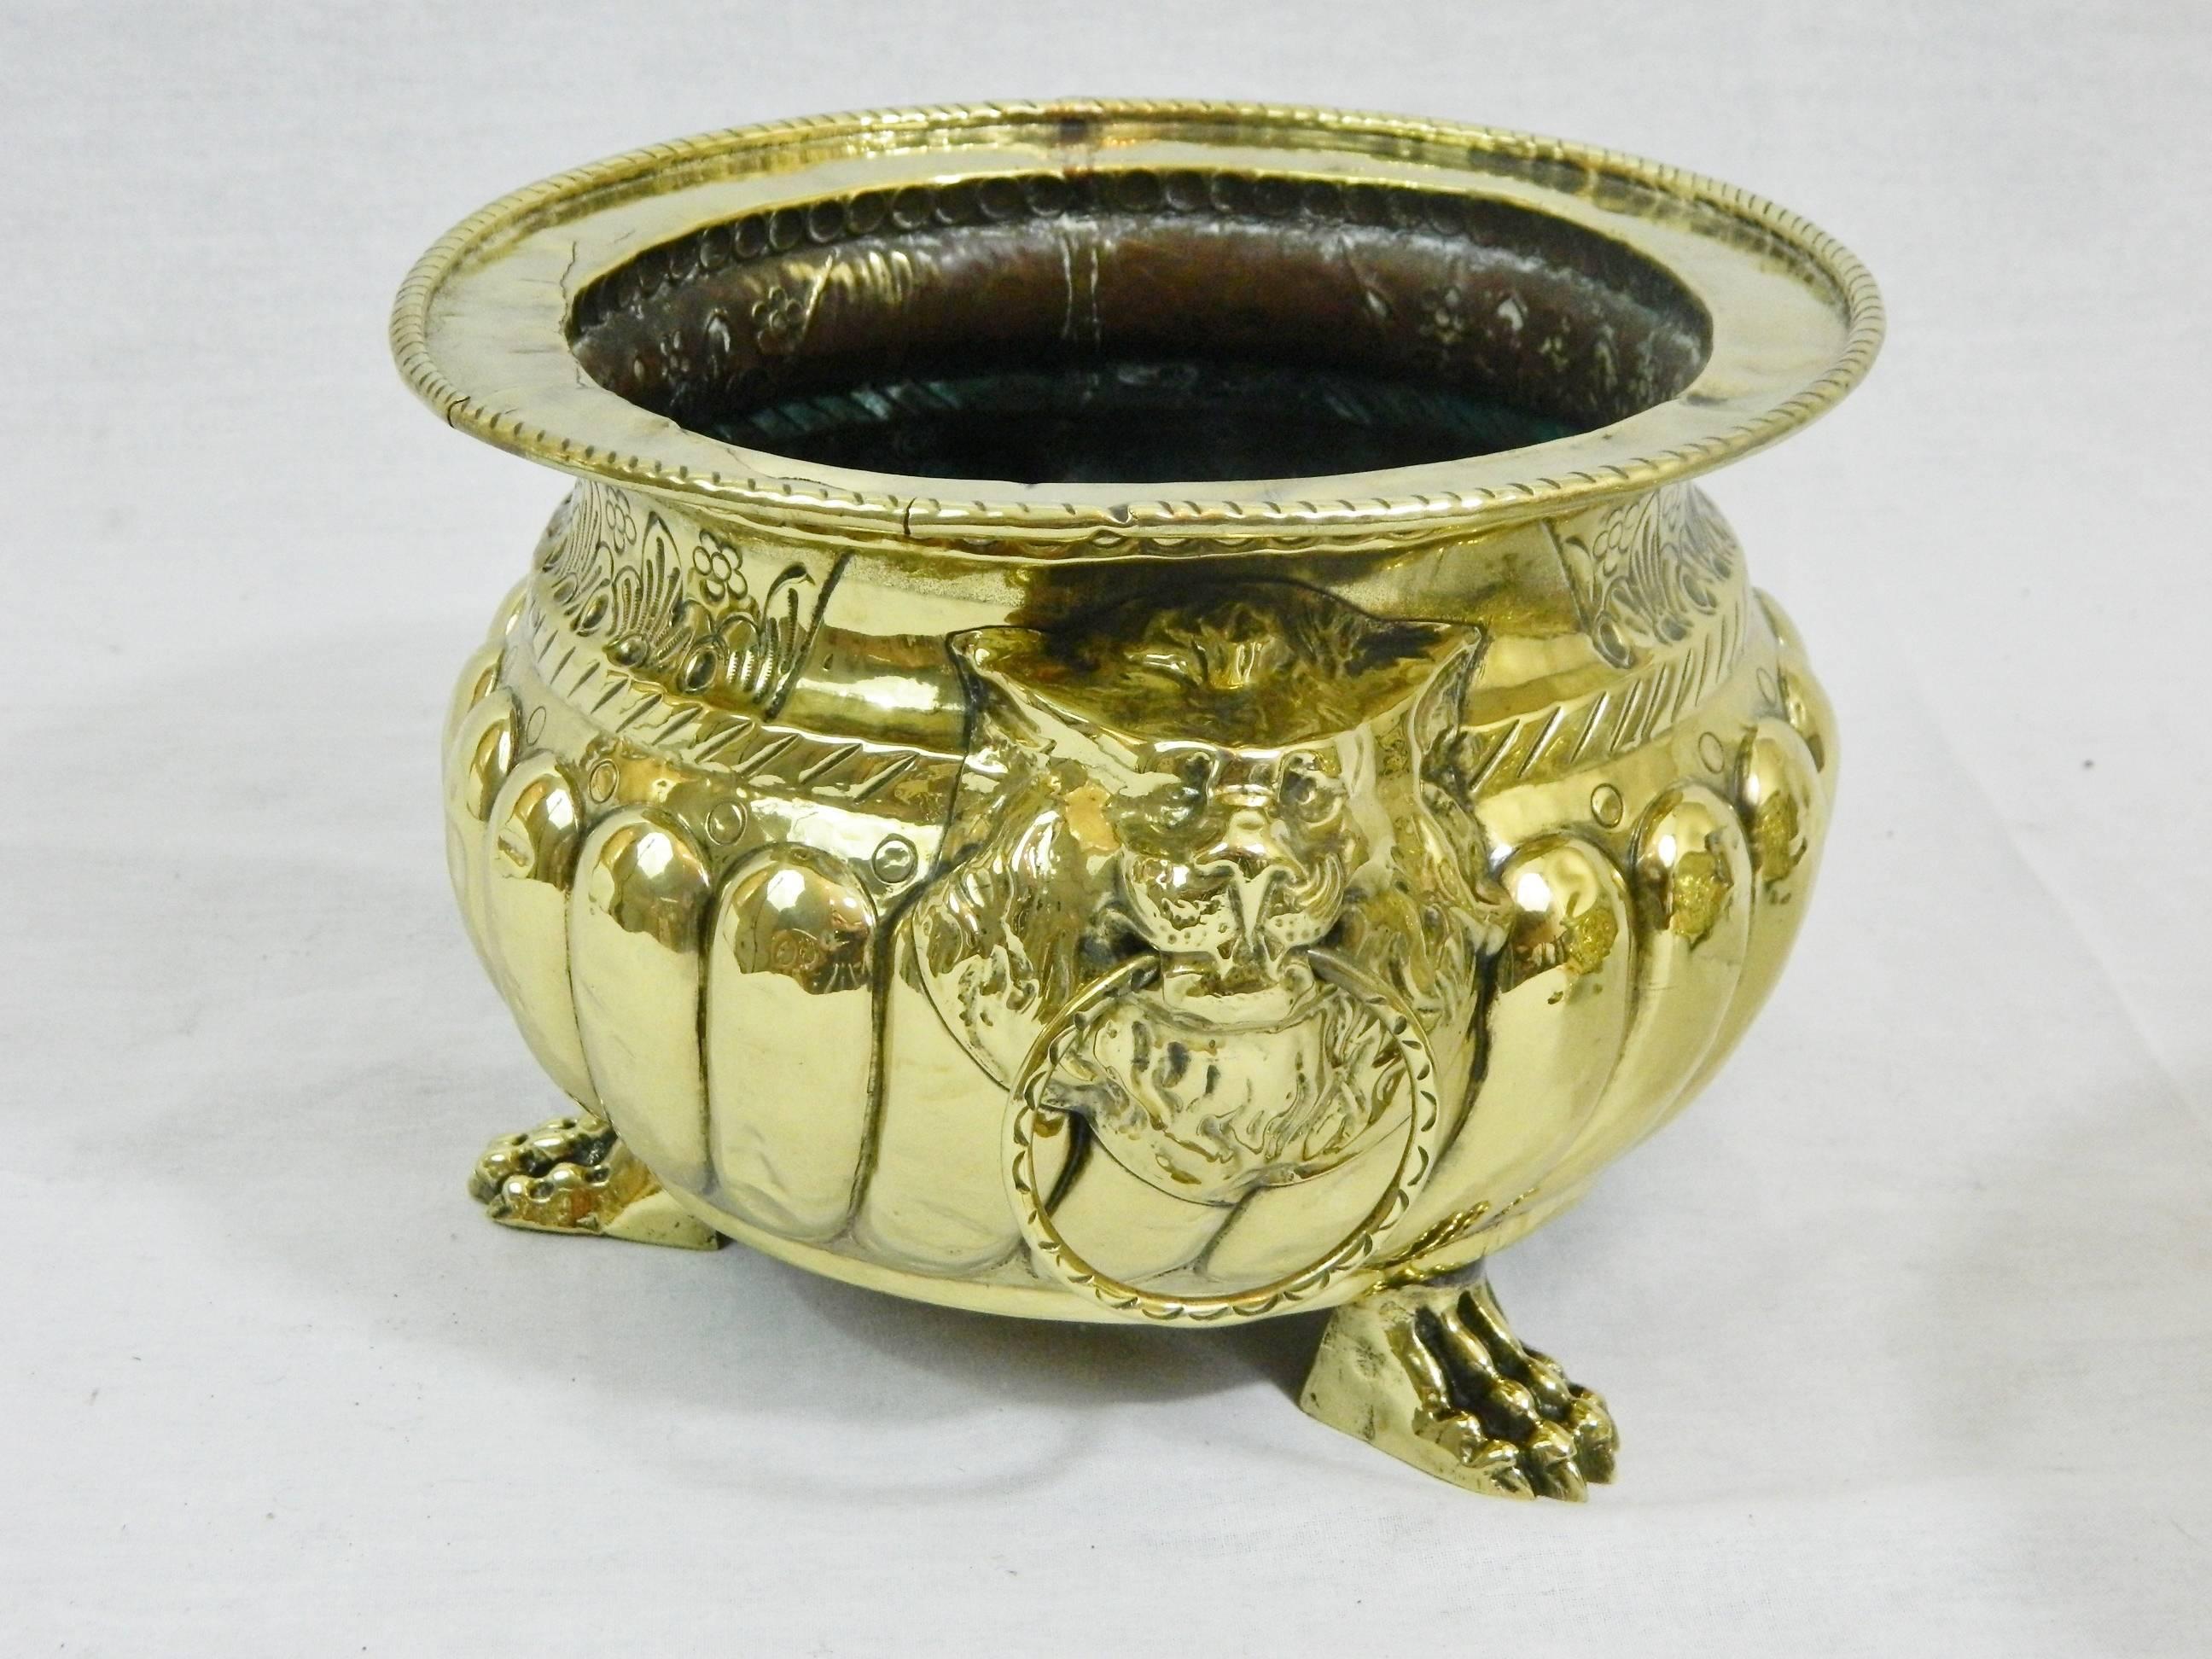 19th Century Polished Brass Jardiniere or Planter with Cast Feet, Lion Face and Ring Handles